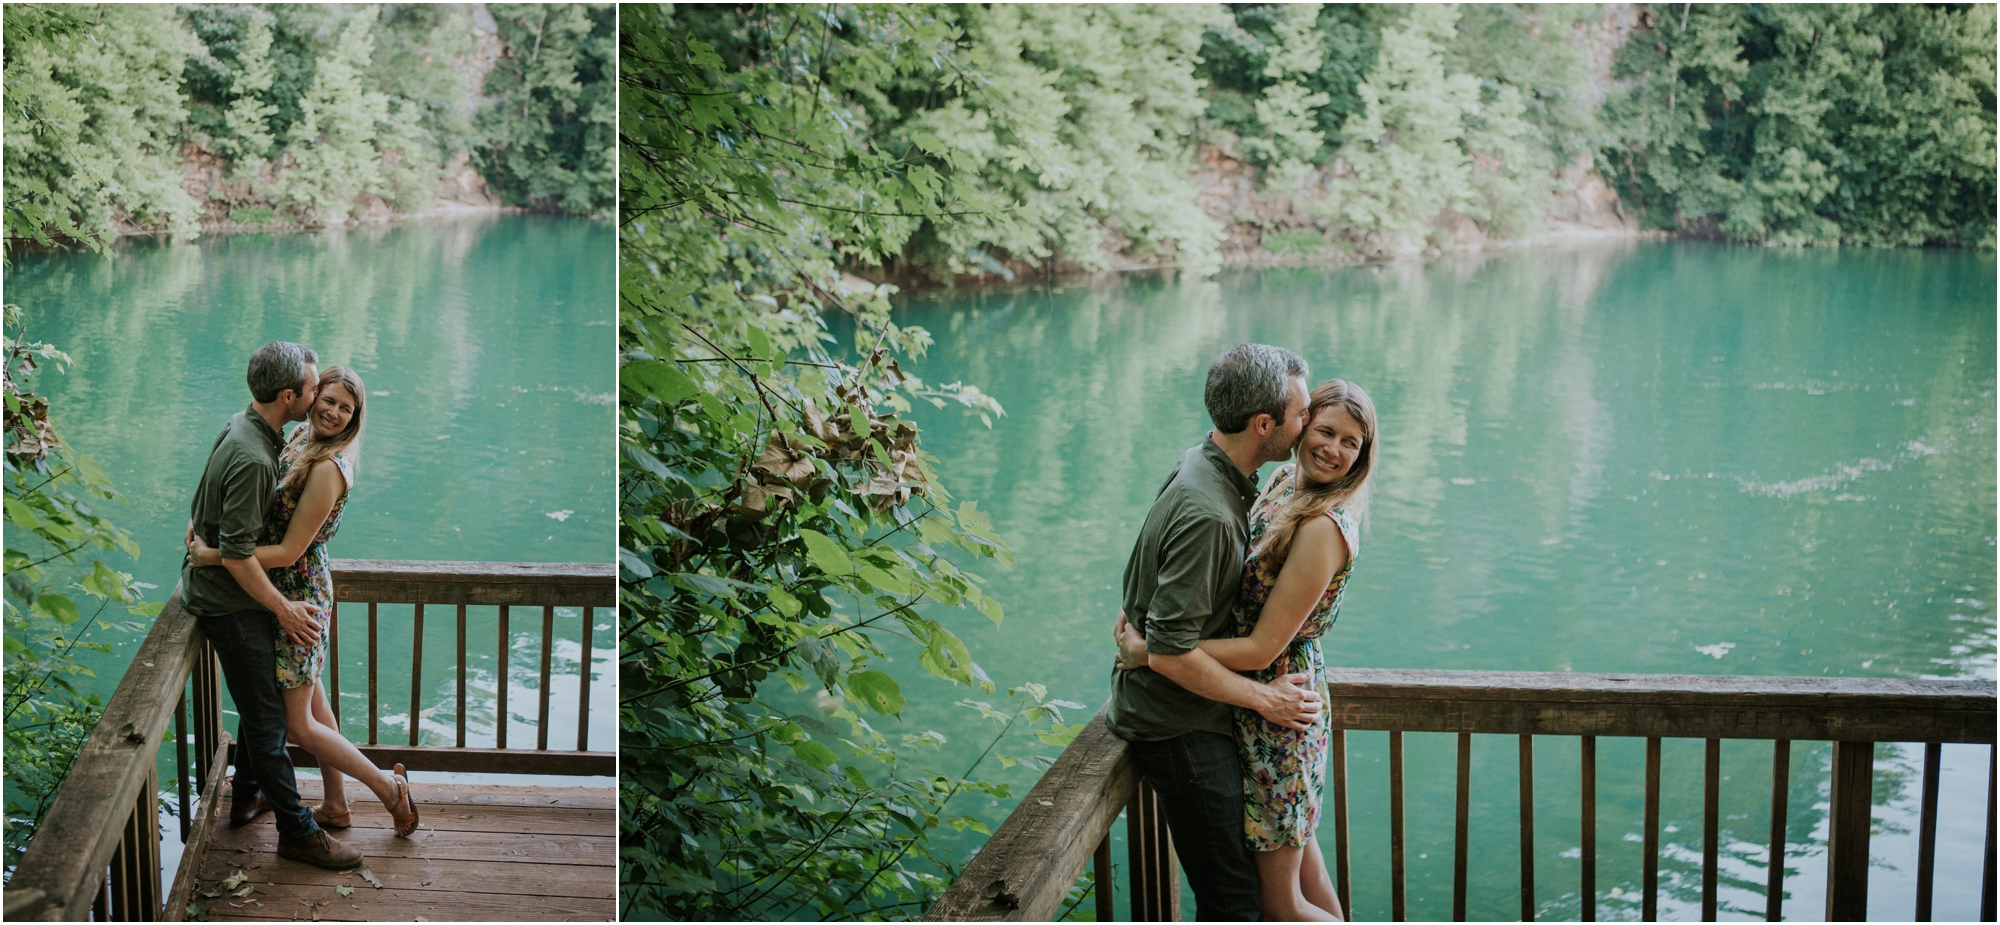 meads-quarry-ijams-nature-center-knoxville-tennessee-engagement-session-summer-northeast-tn-adventurous-outdoors-lake-katy-sergent_0009.jpg